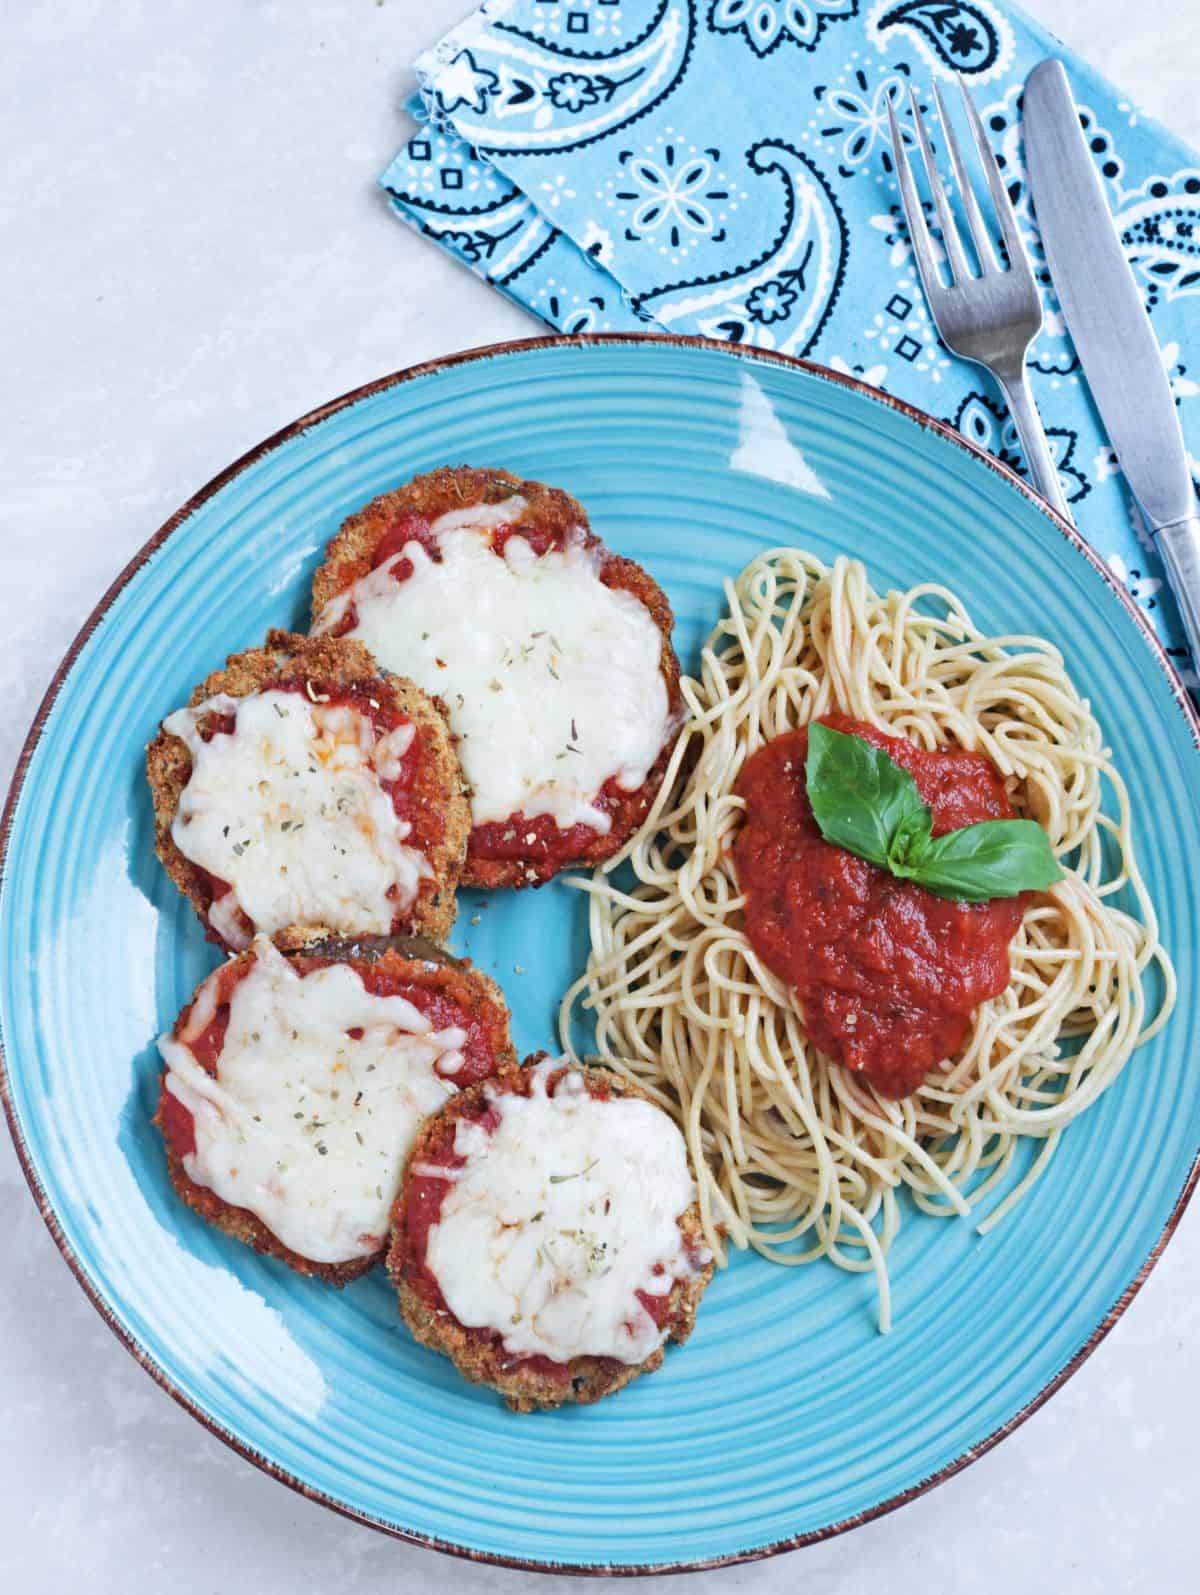 Eggplant parmesan with pasta and sauce in a blue plate